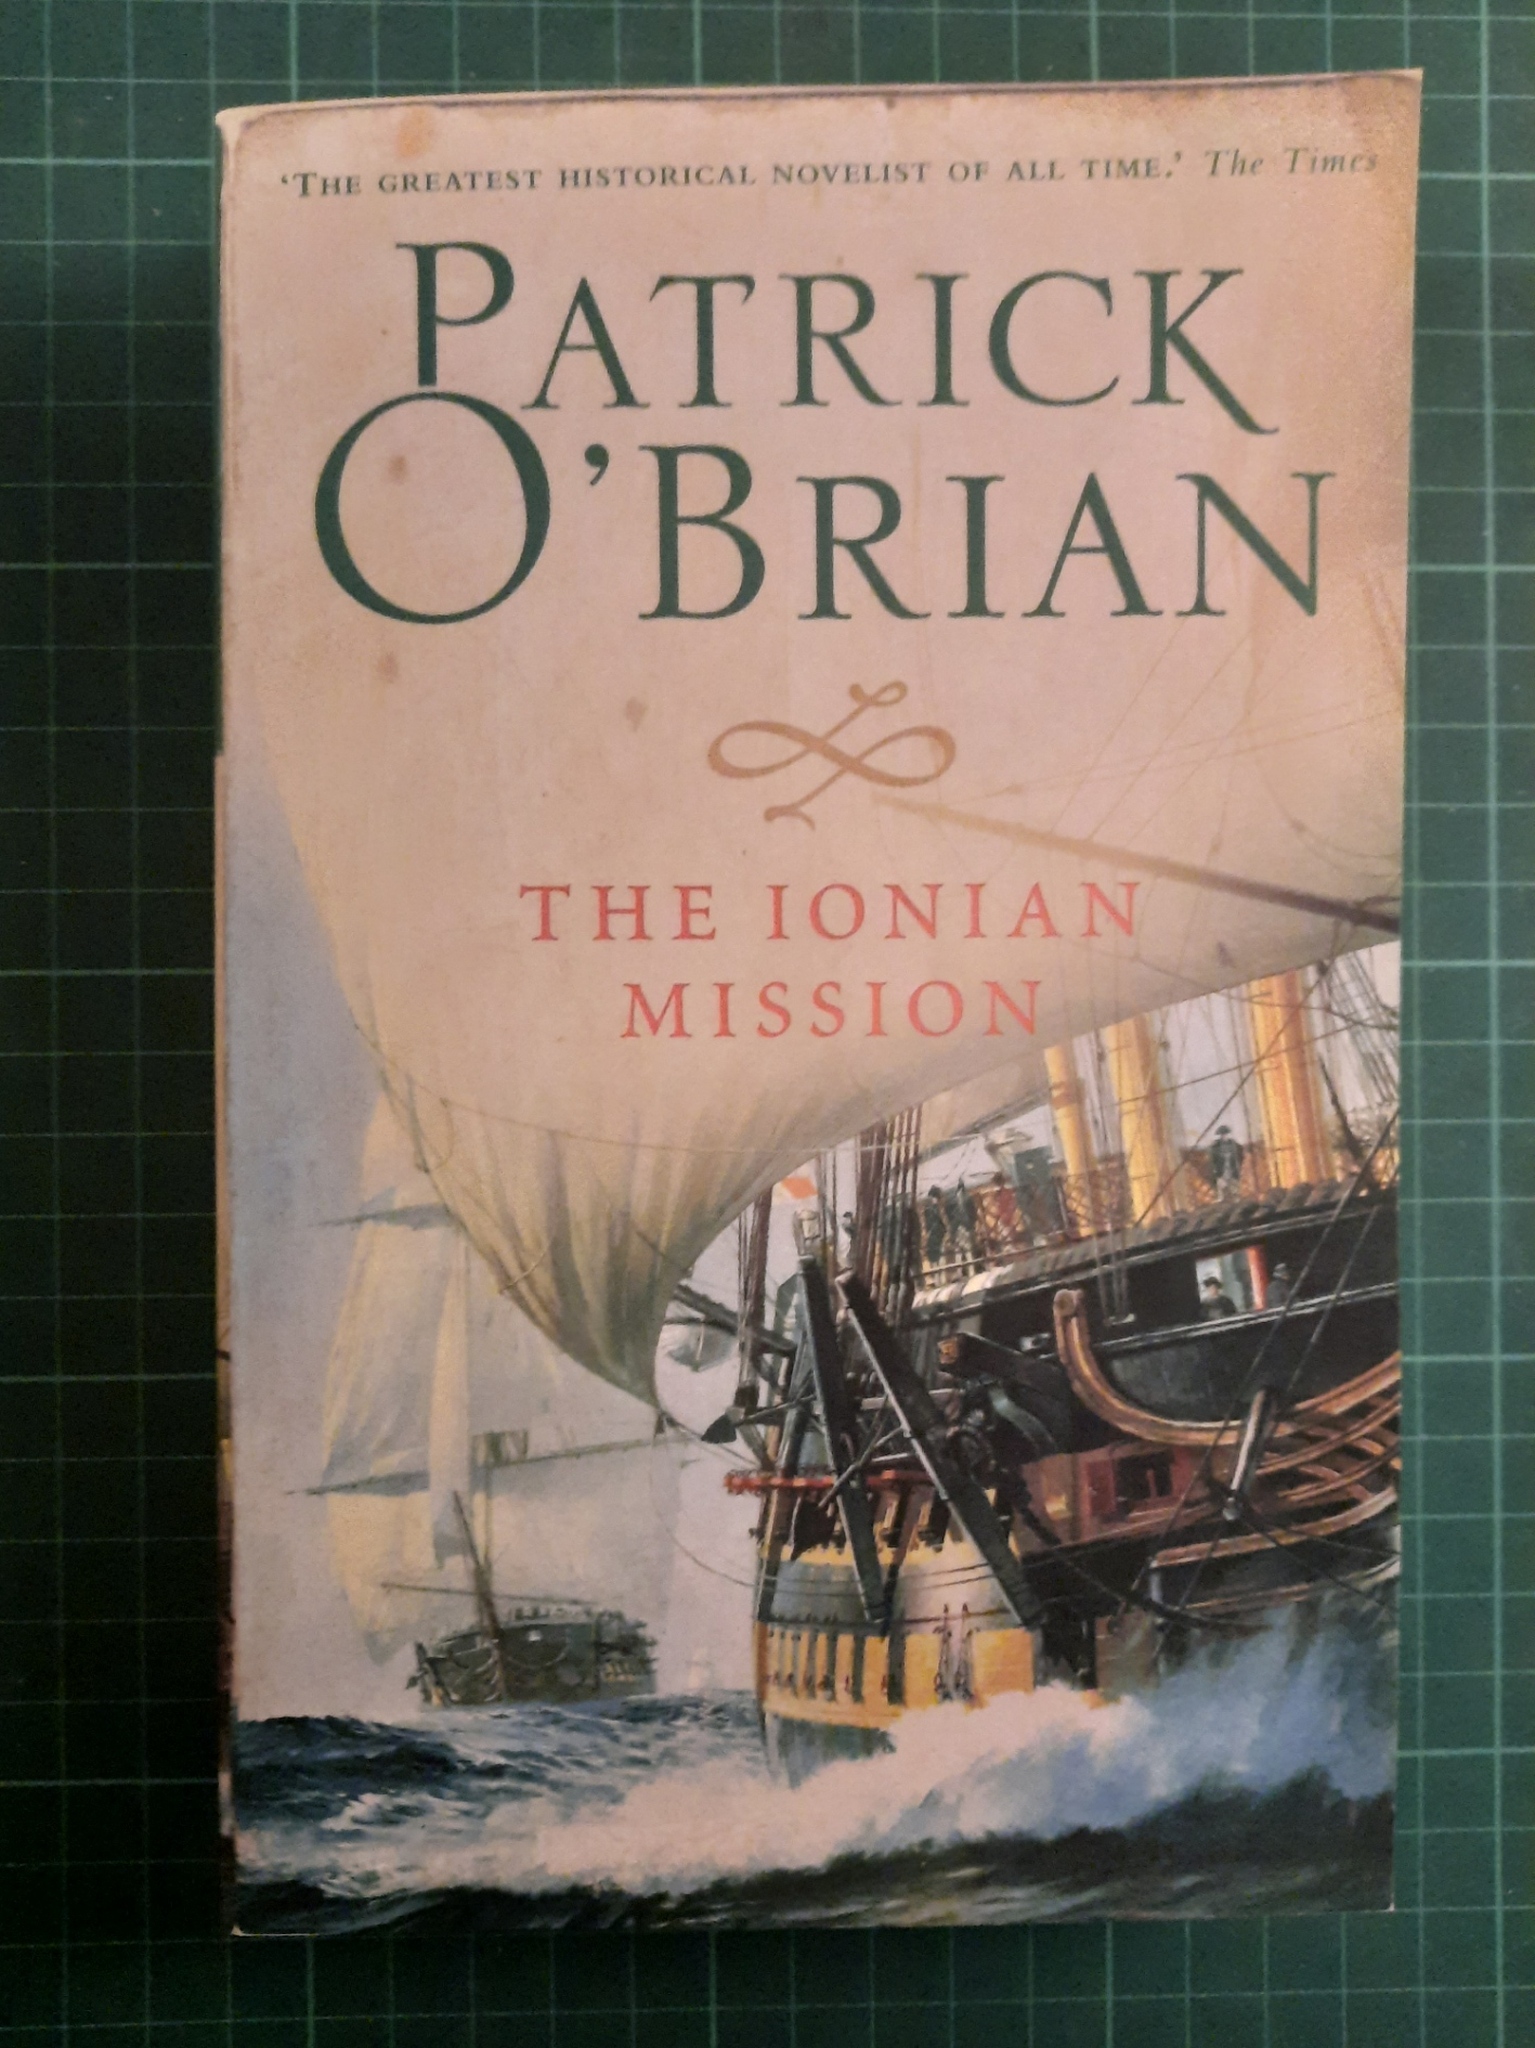 Patrick O'Brian The far side of the world